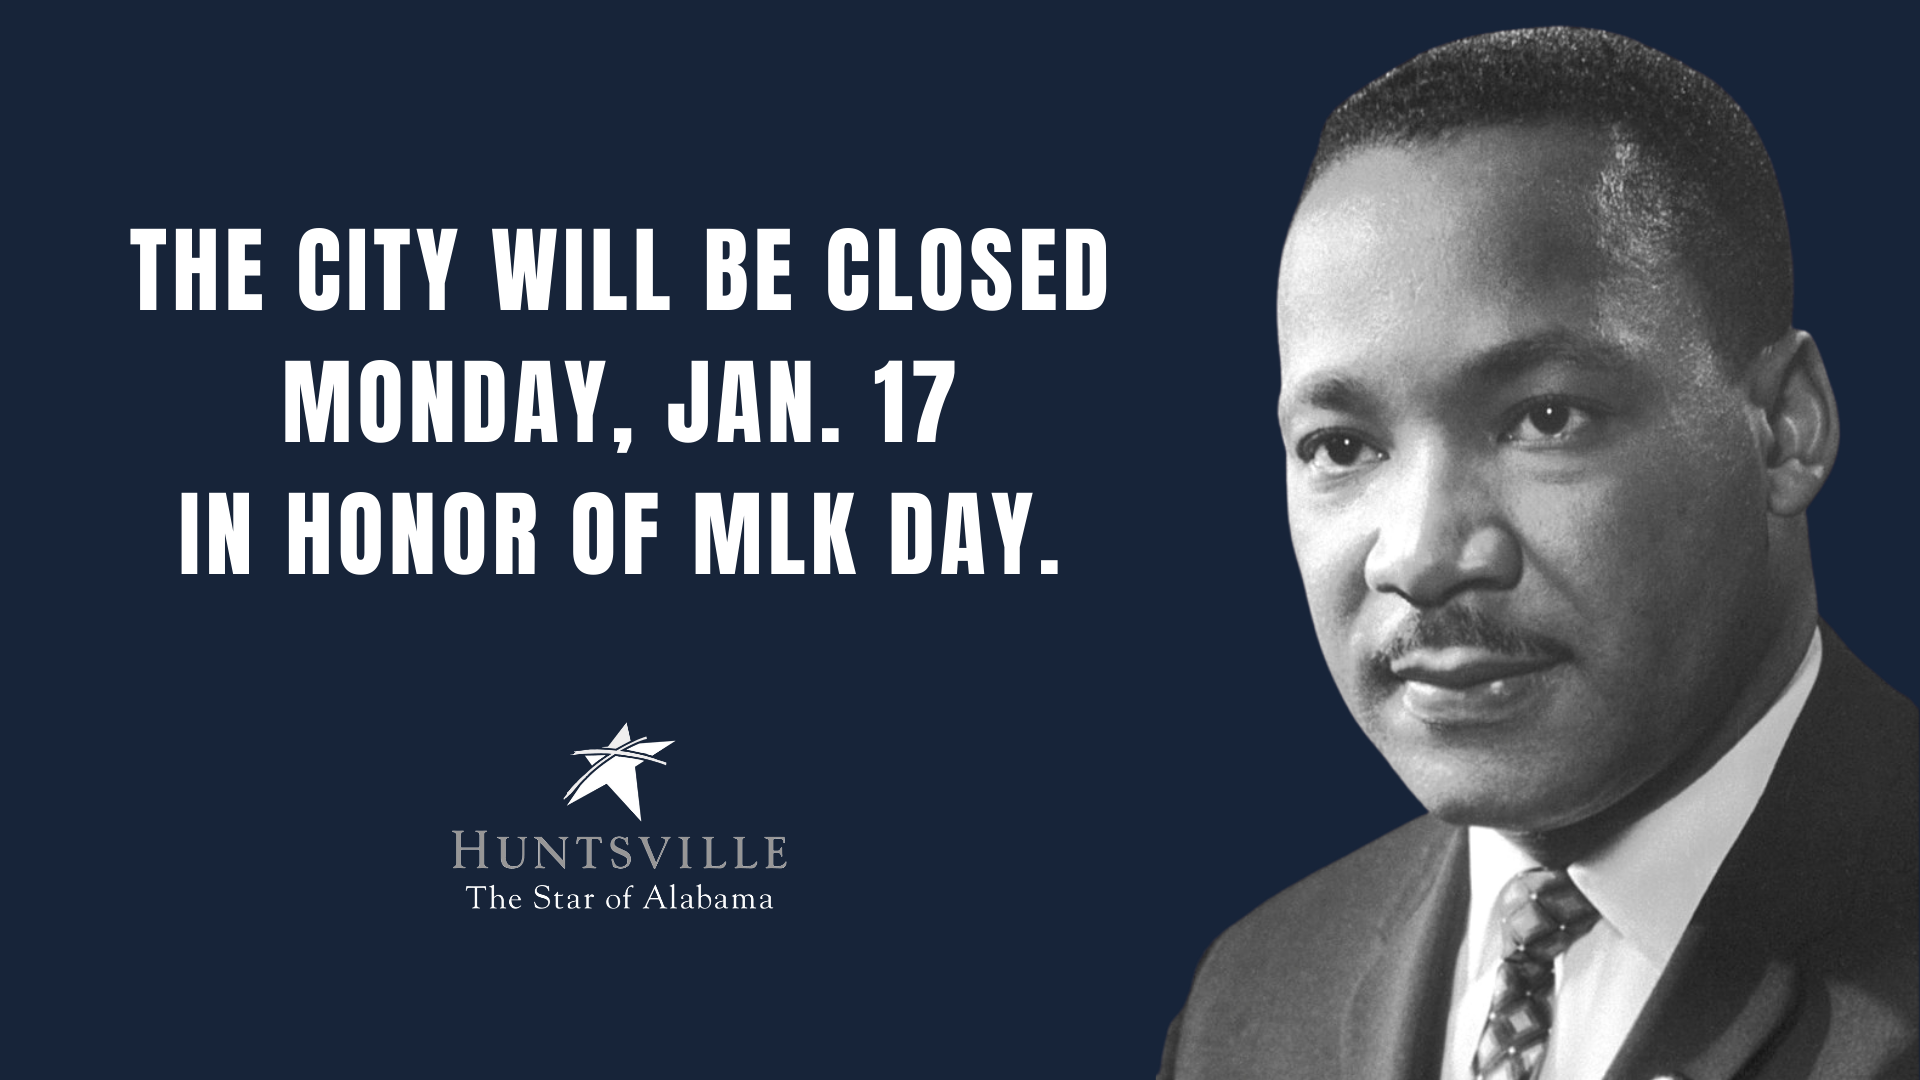 Huntsville municipal offices closed for Martin Luther King Jr. Day